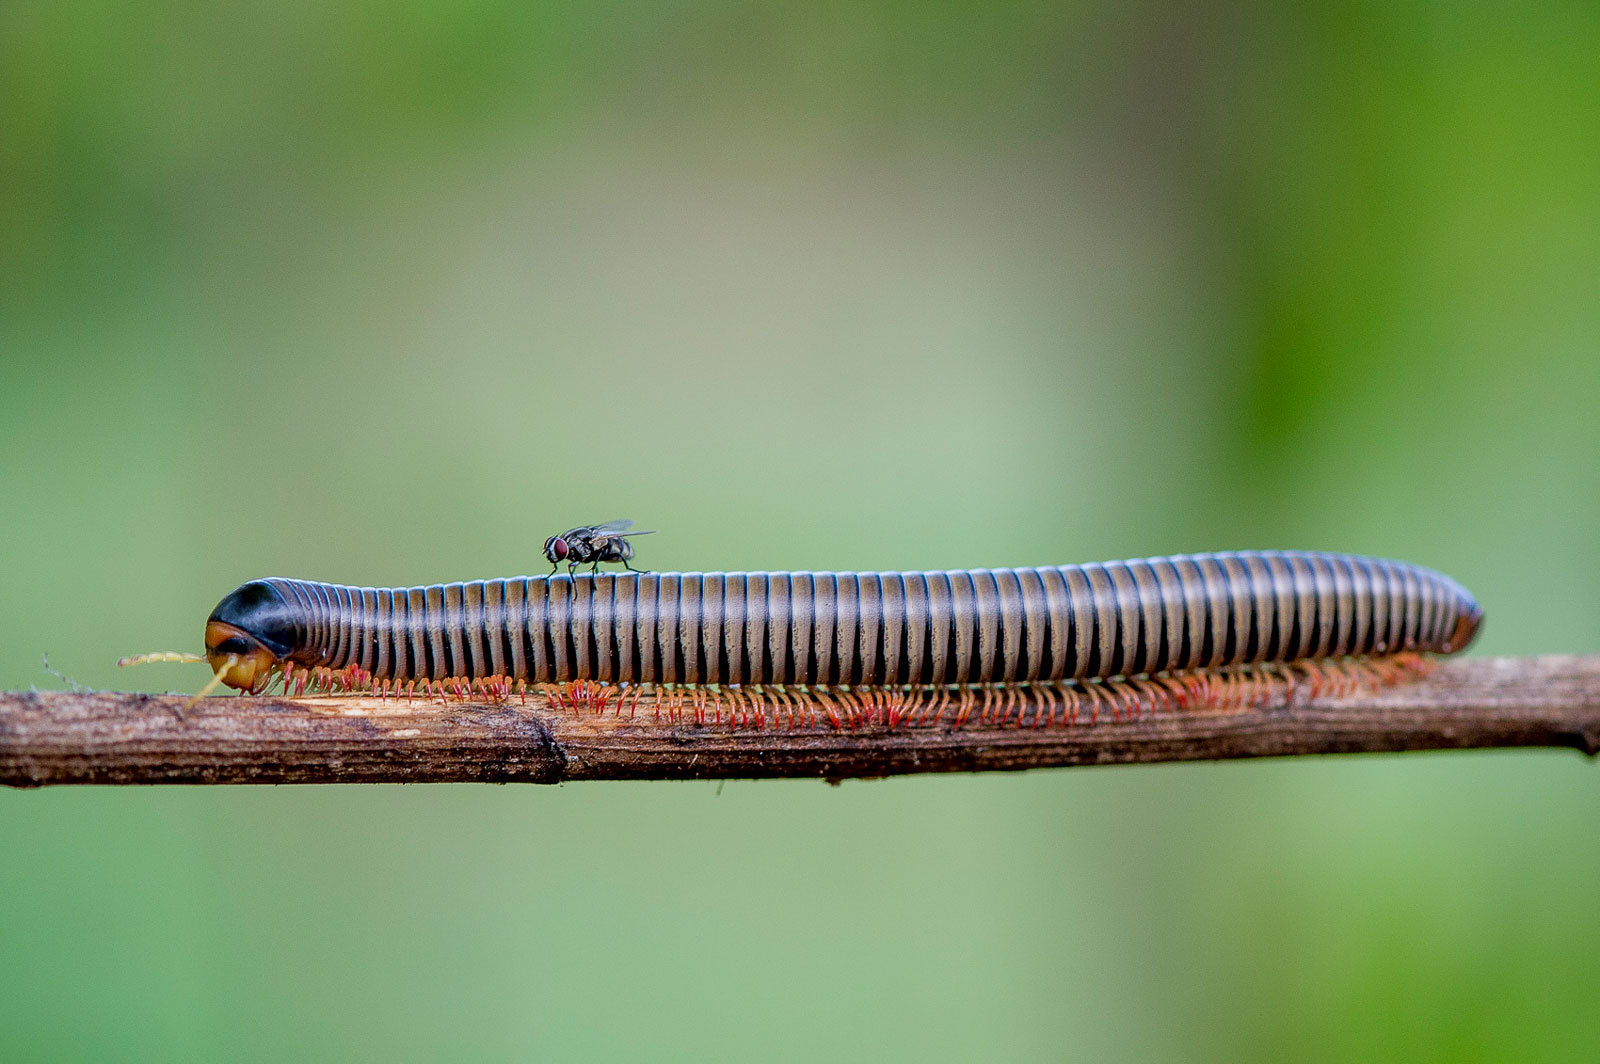 A house fly riding on the back of a Diplopoda millipede, 2015